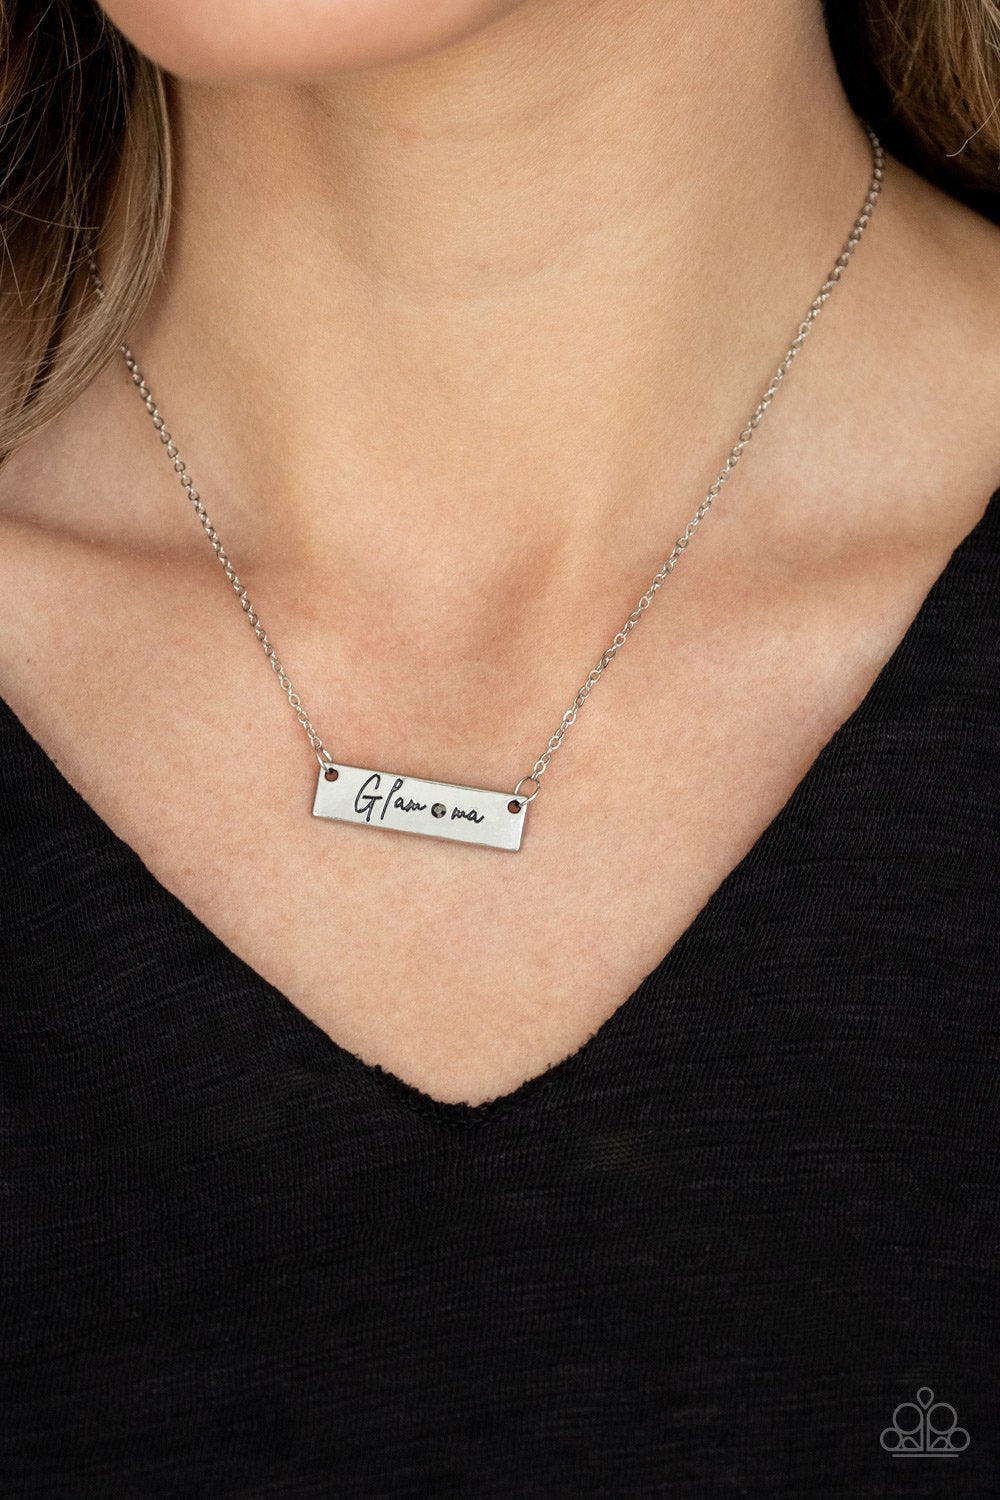 The GLAM-Ma-silver-Paparazzi necklace